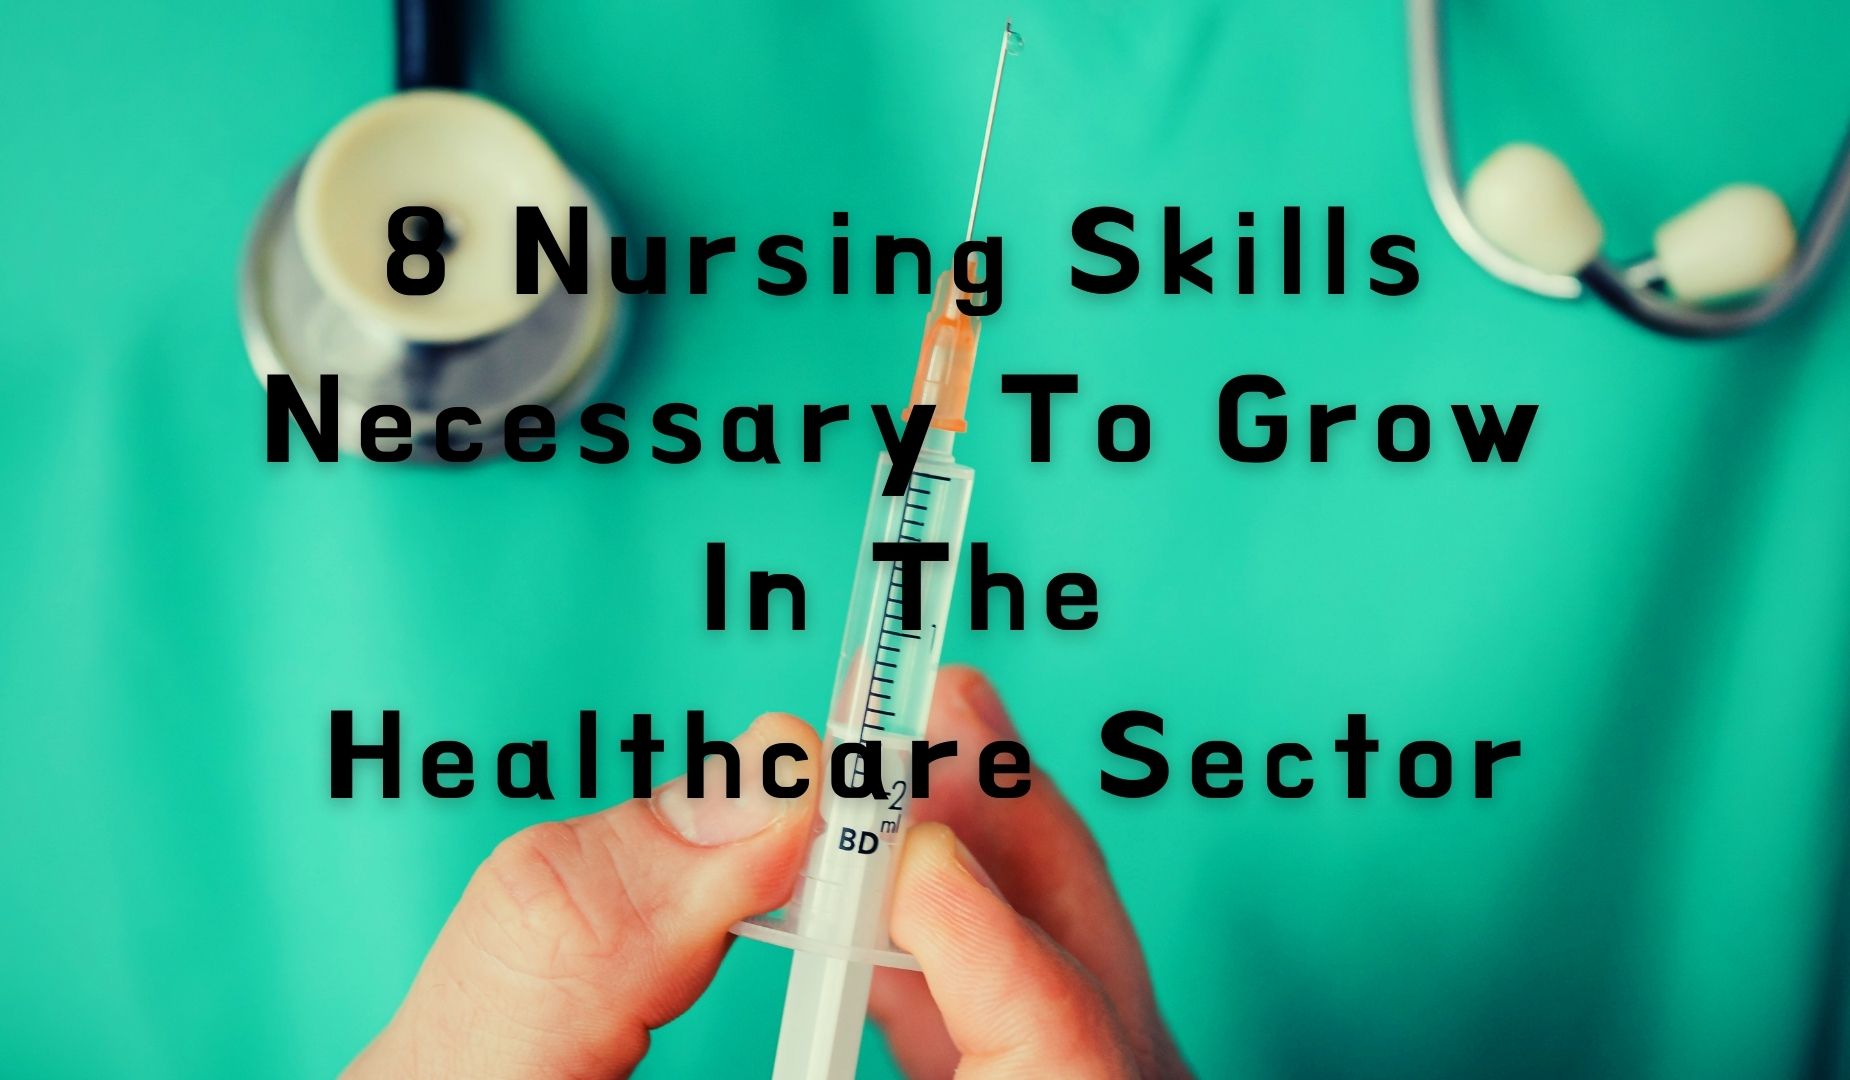 8 Nursing Skills Necessary to Grow In the Healthcare Sector